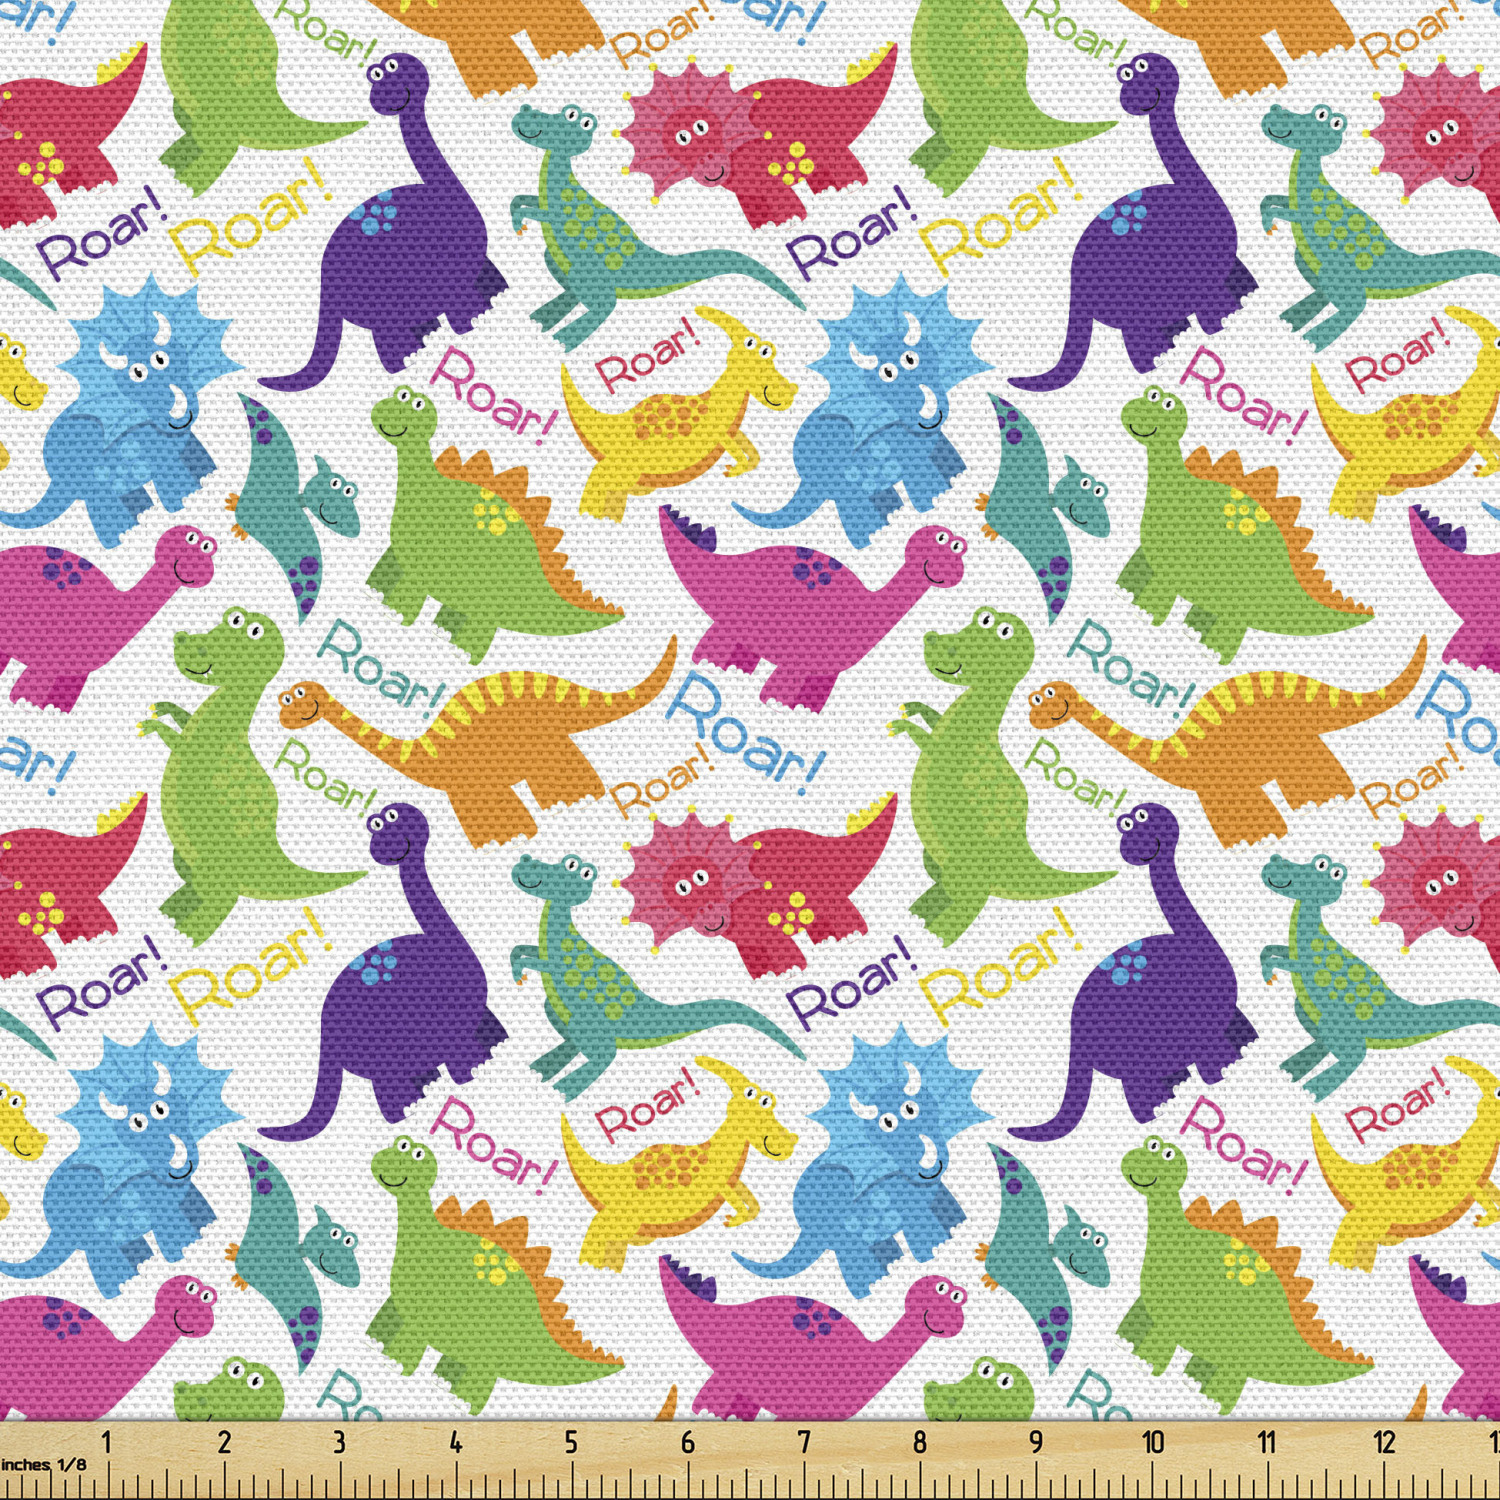 Dinosaur Themed Decorative Fabric by Ambesonne